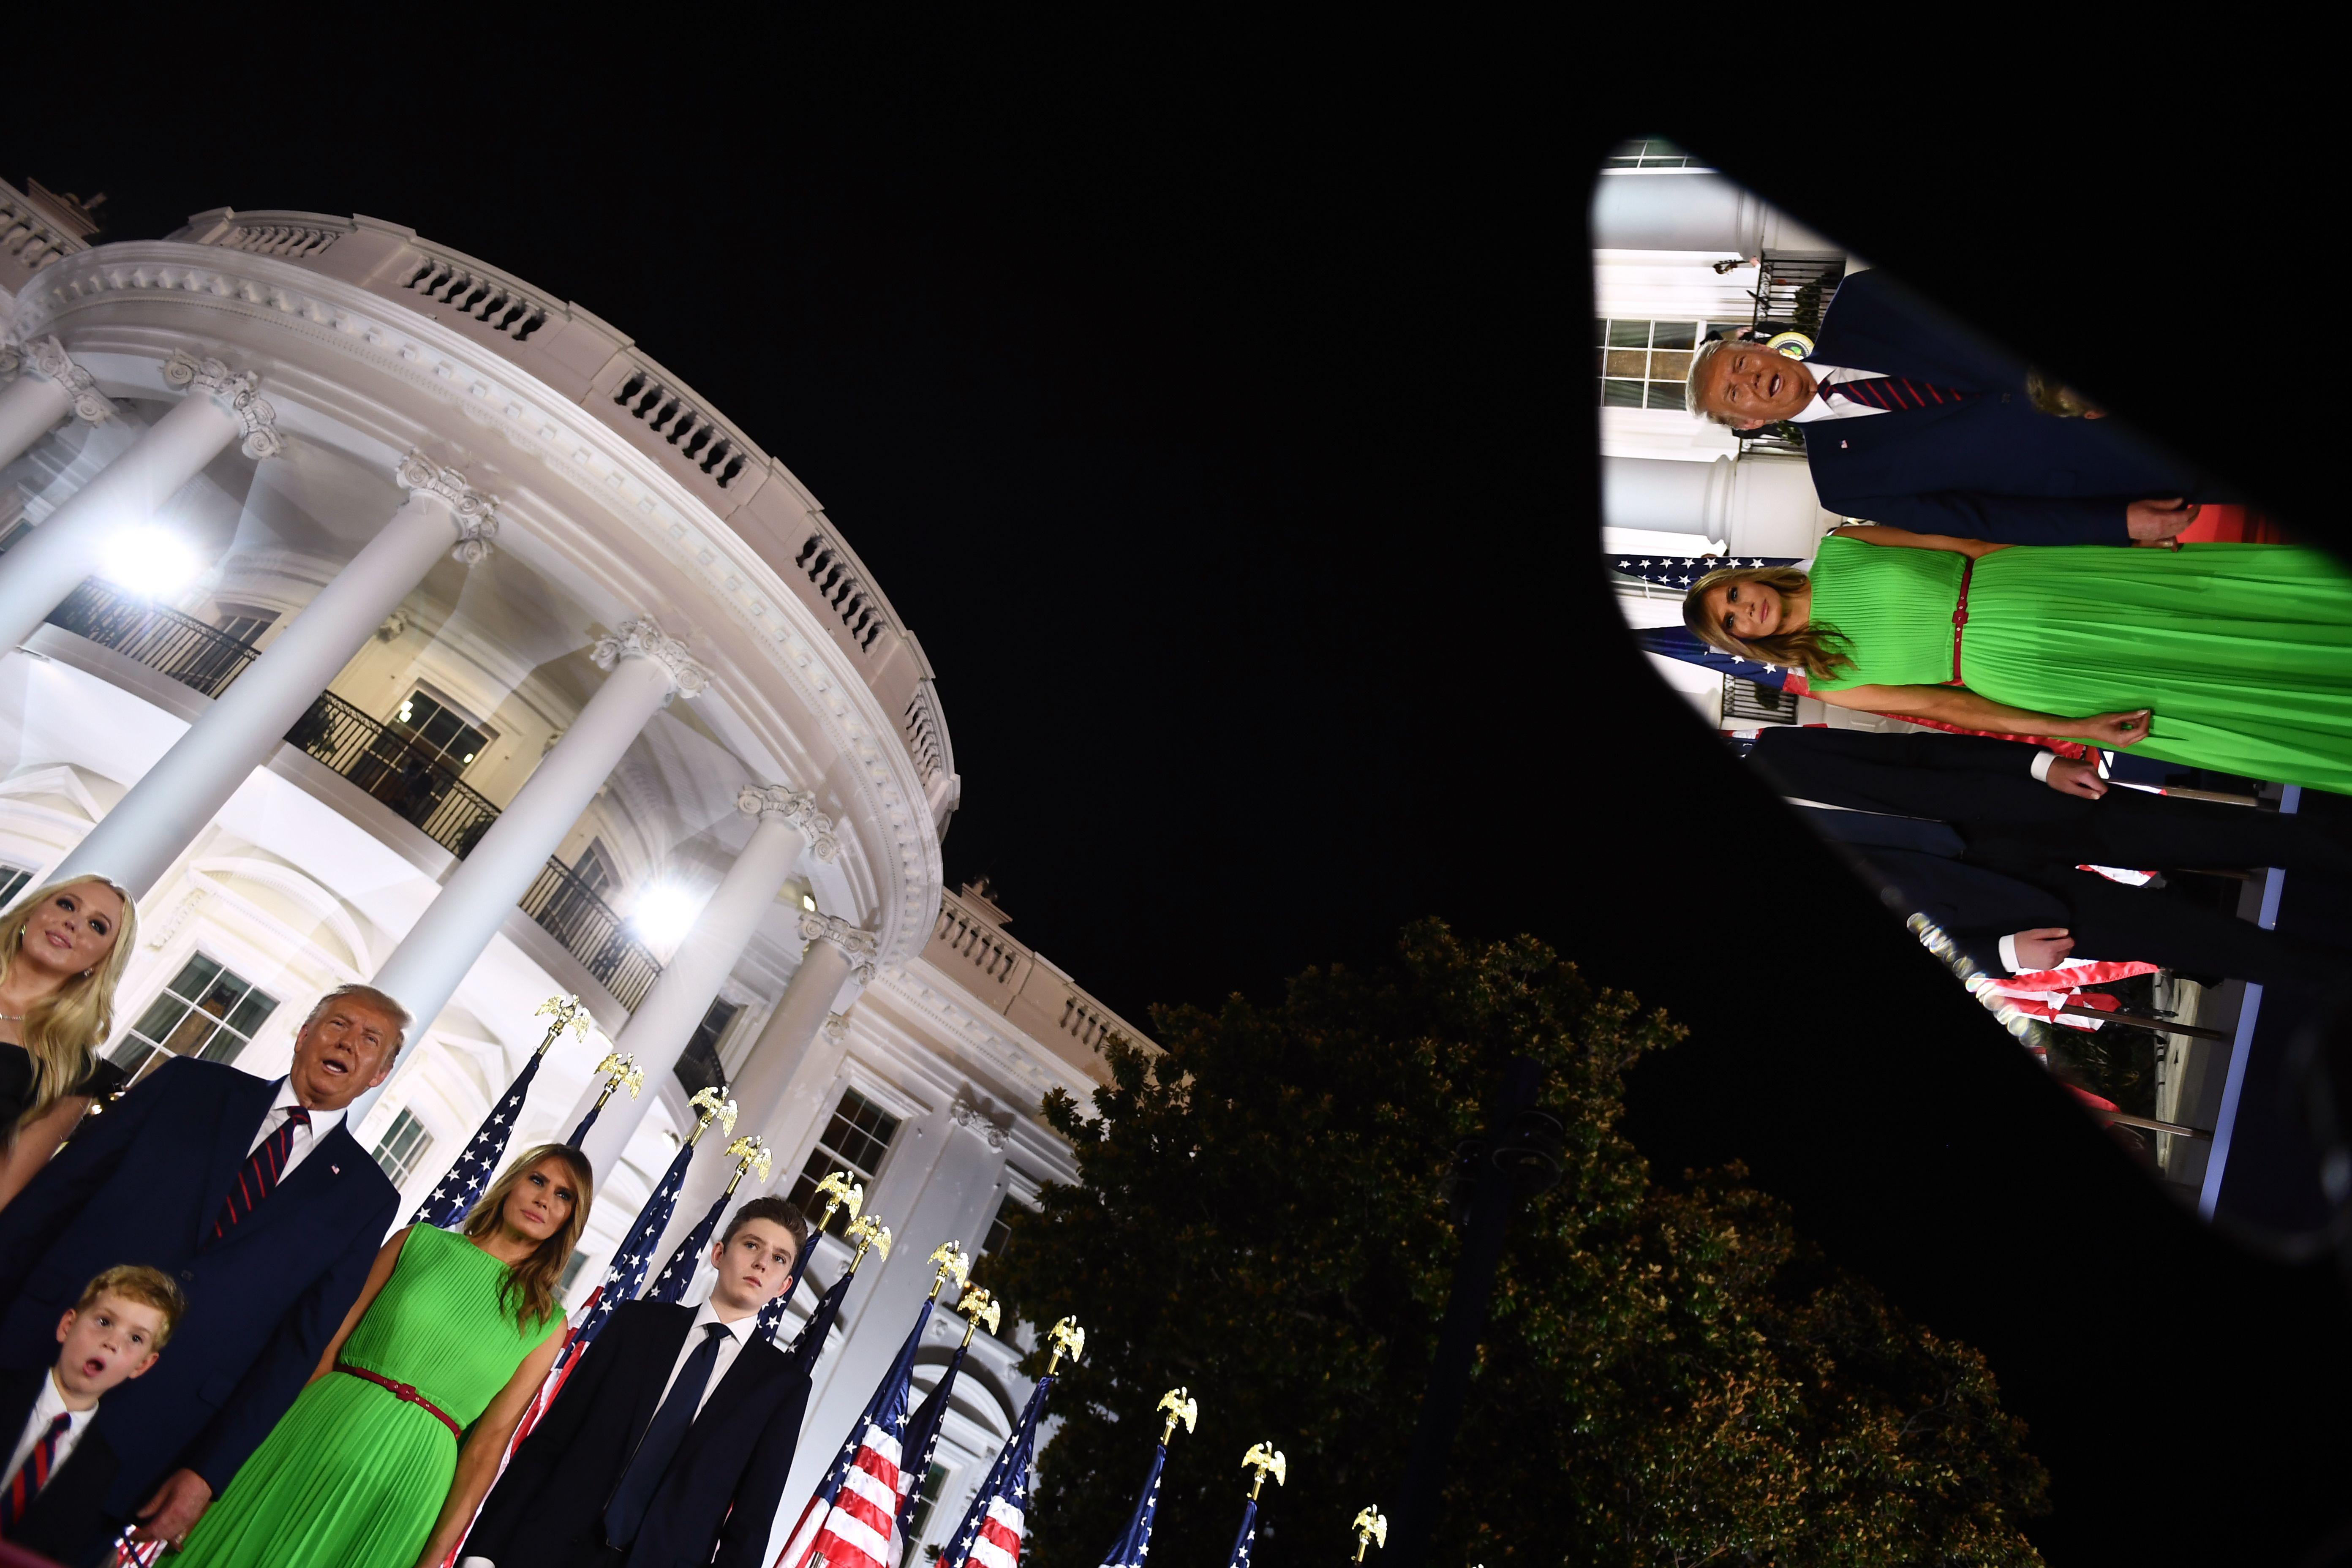 The Trump family stands in front of the White House at night. Their image is reflected in the screen of a teleprompter.